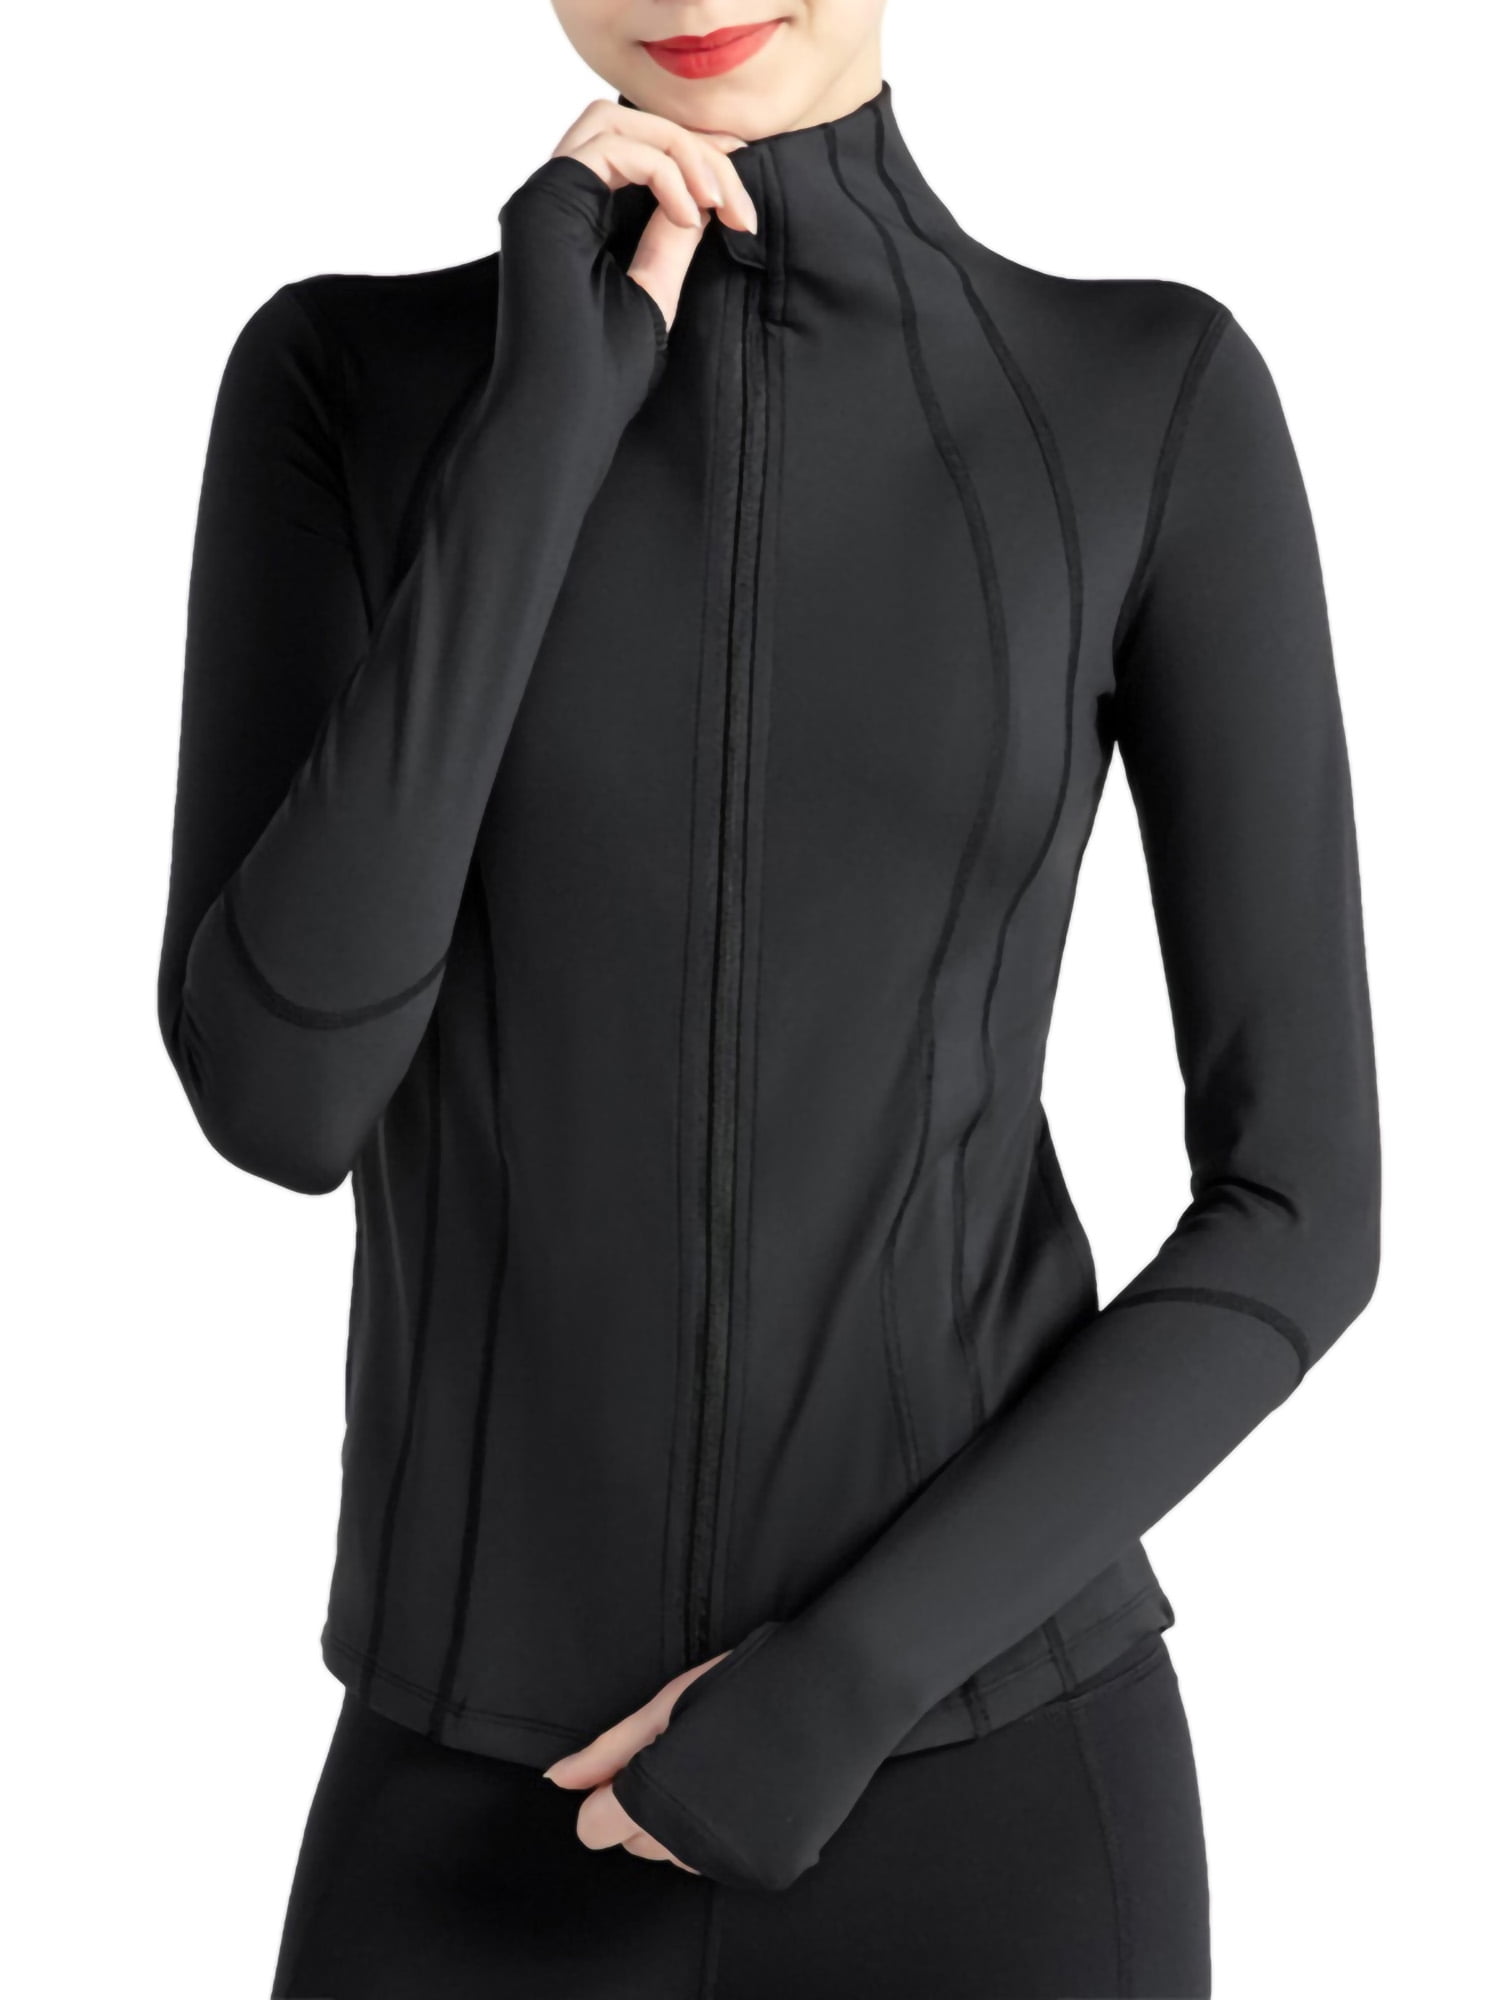 Women's Yoga Coats Long Sleeve Jacket Running Athletic Pullover Zipper  Lightweight Slim Fit Quick Dry Shirts Outerwear Workout